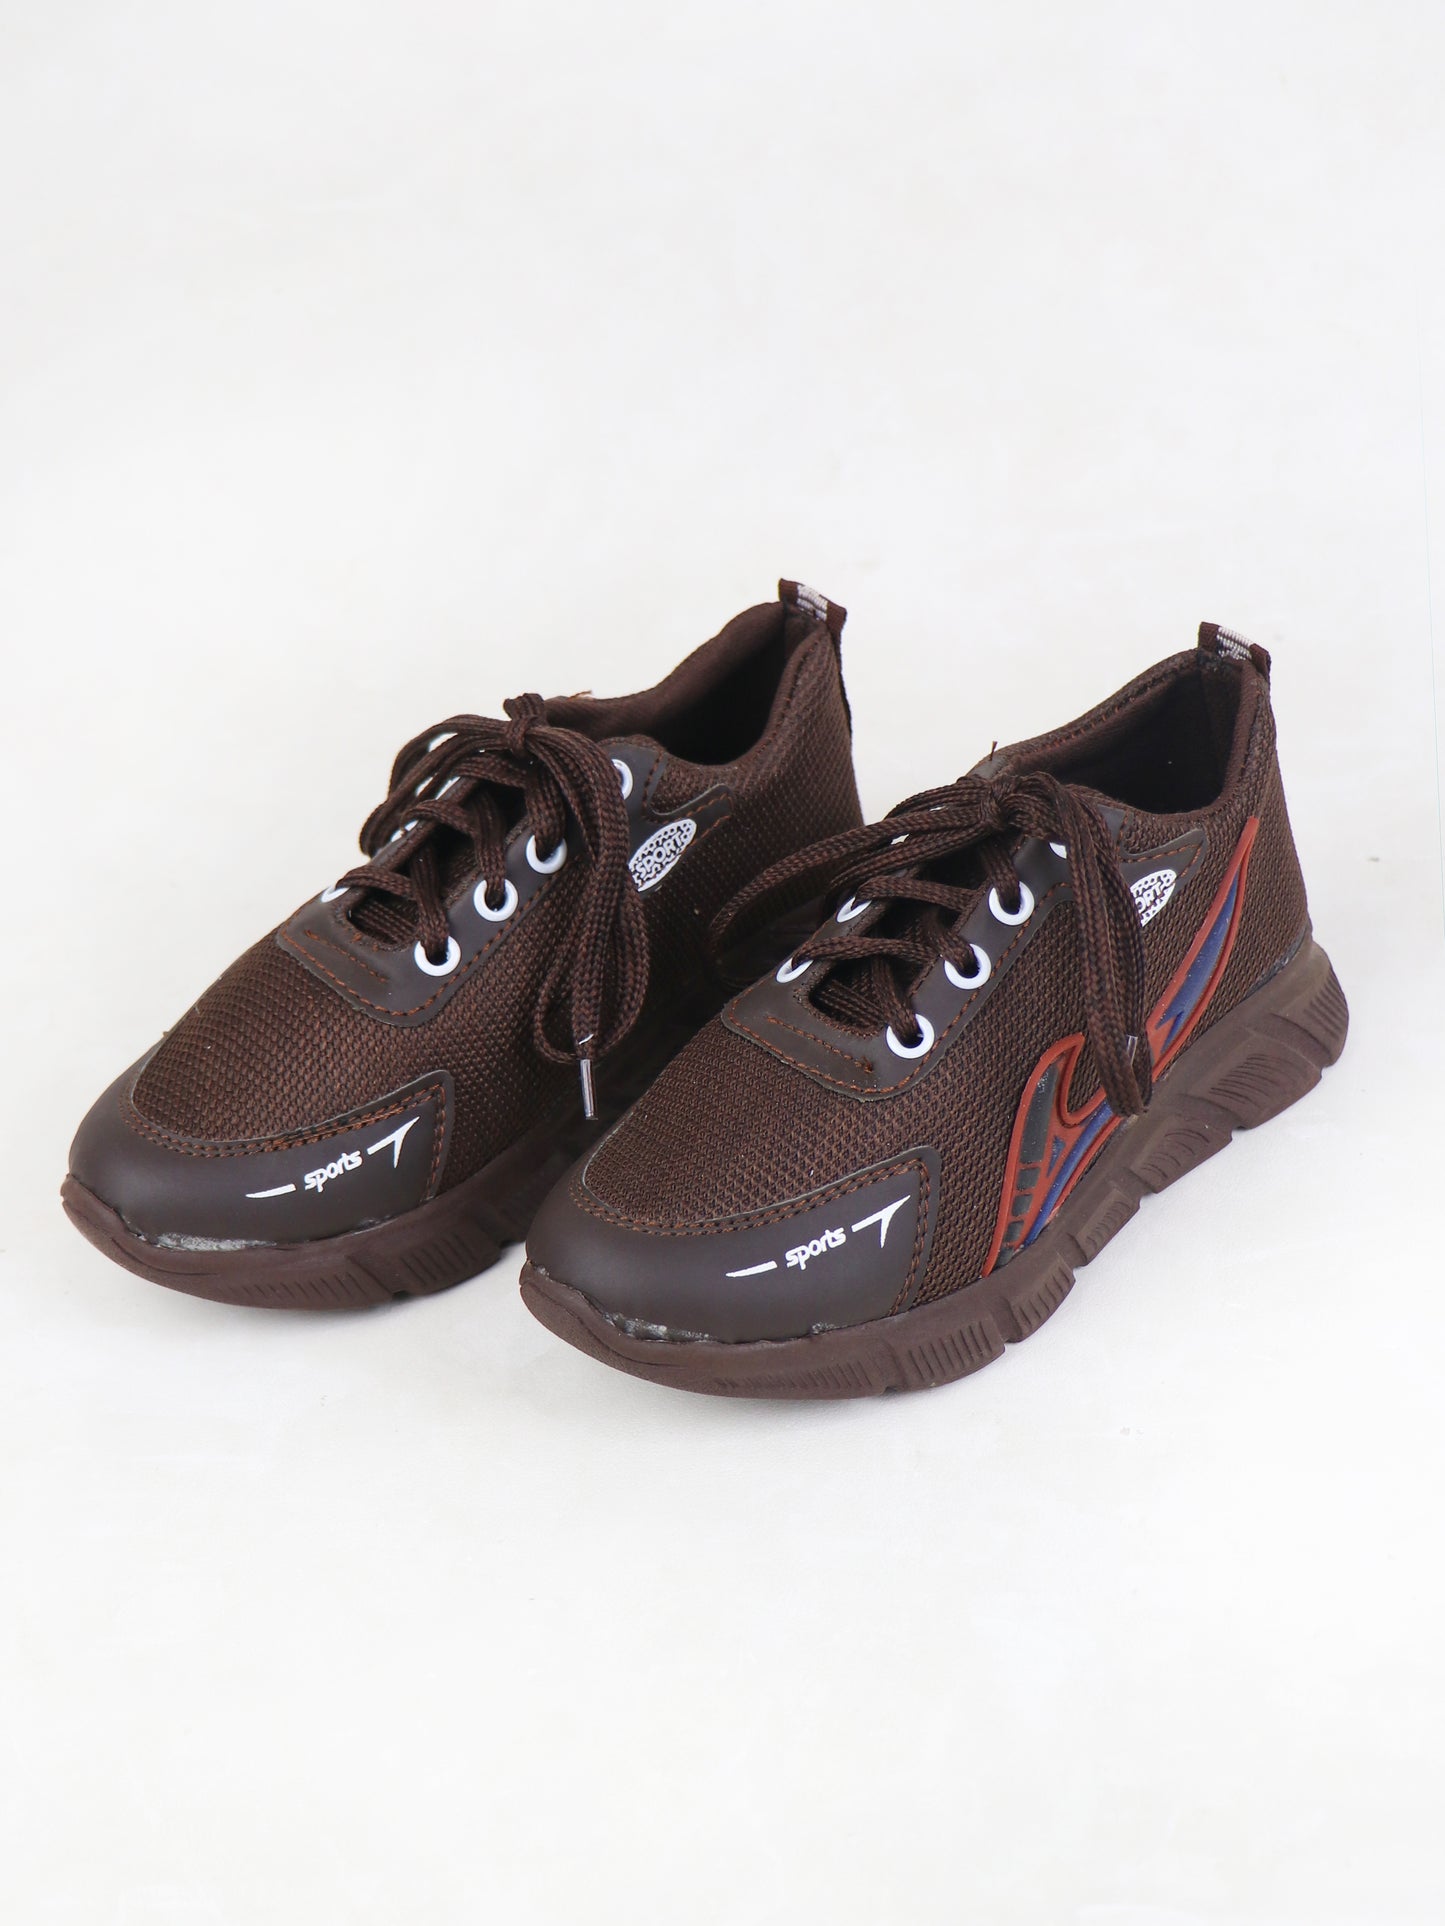 BS42 Boys Lace Shoes 8Yrs - 12Yrs Brown